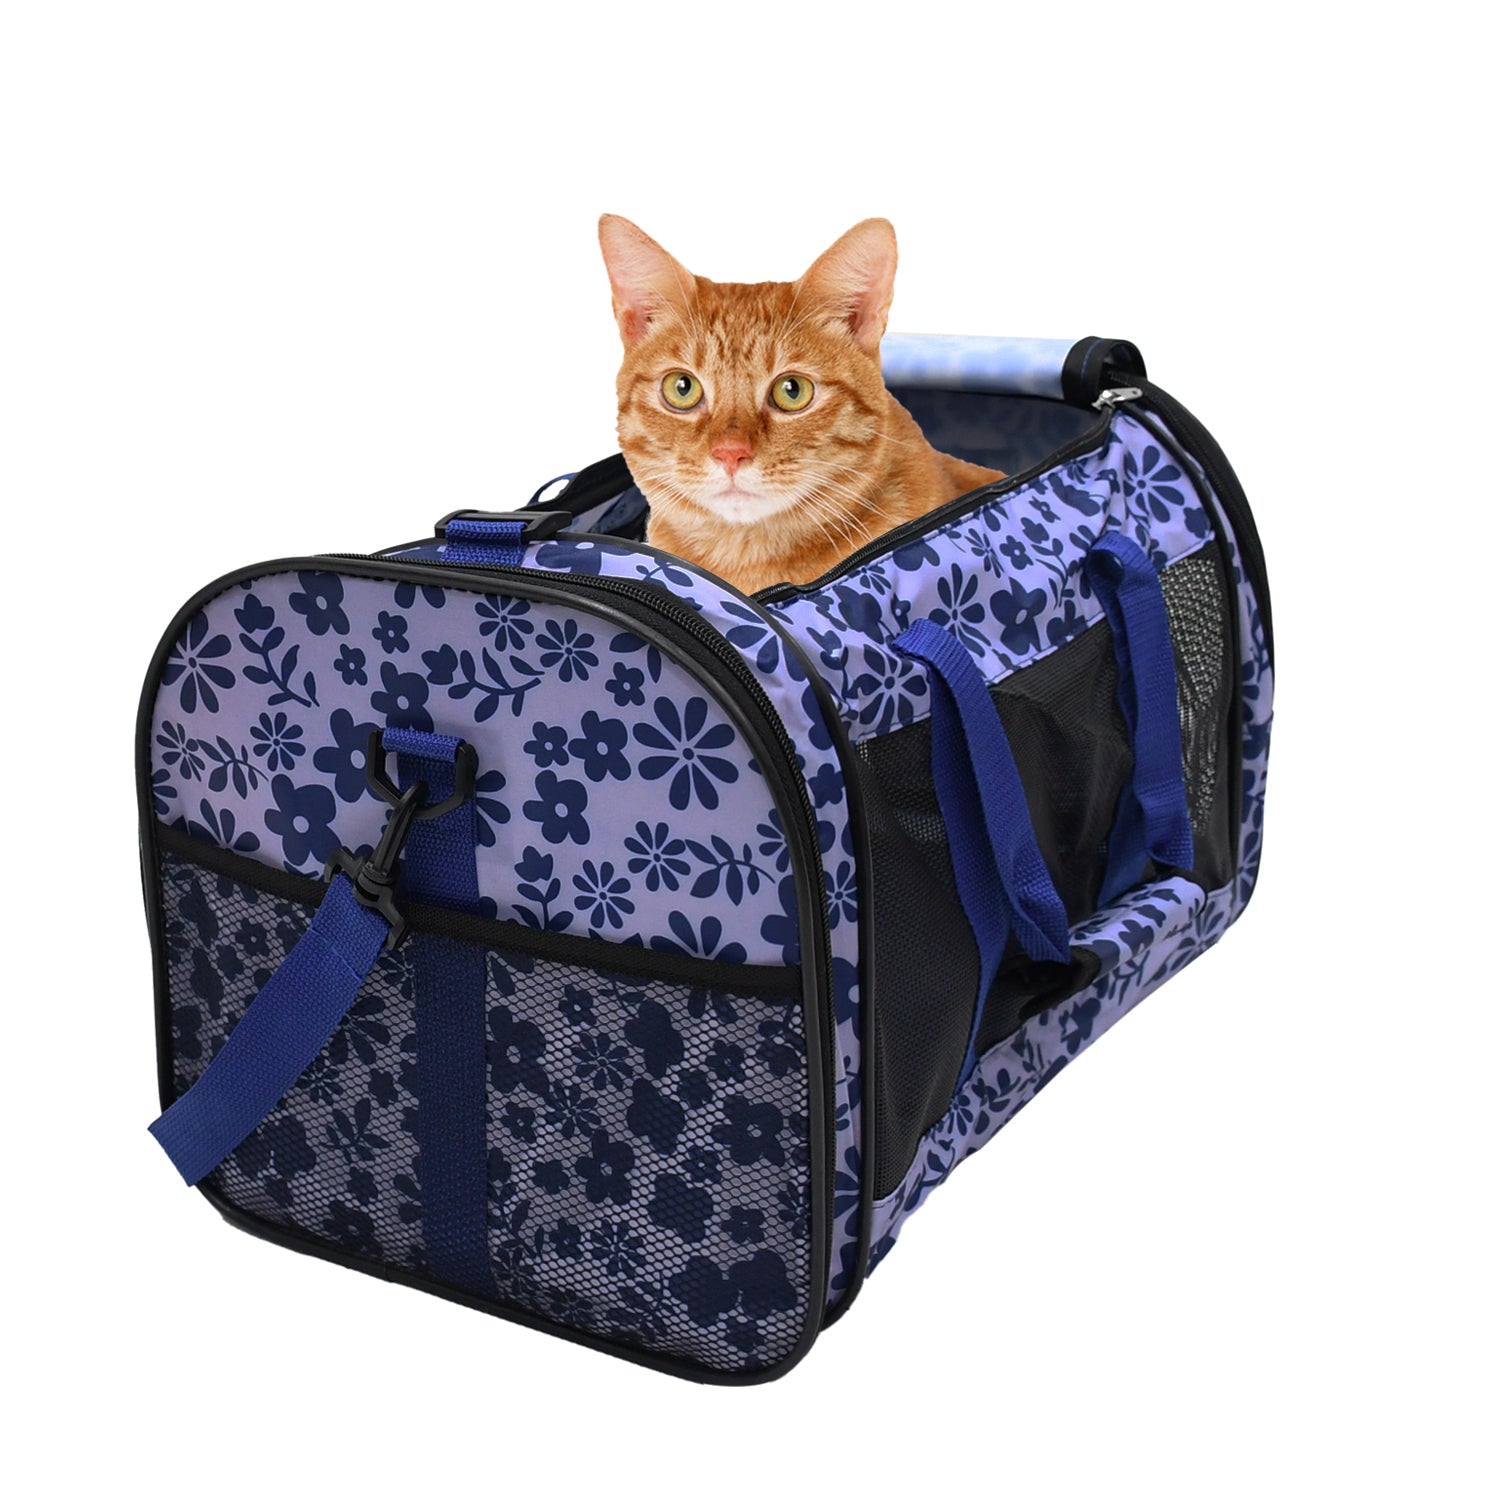 GOOPAWS Soft-Sided Small Dog Cat Carrier Bag, Floral Print Blue, 19